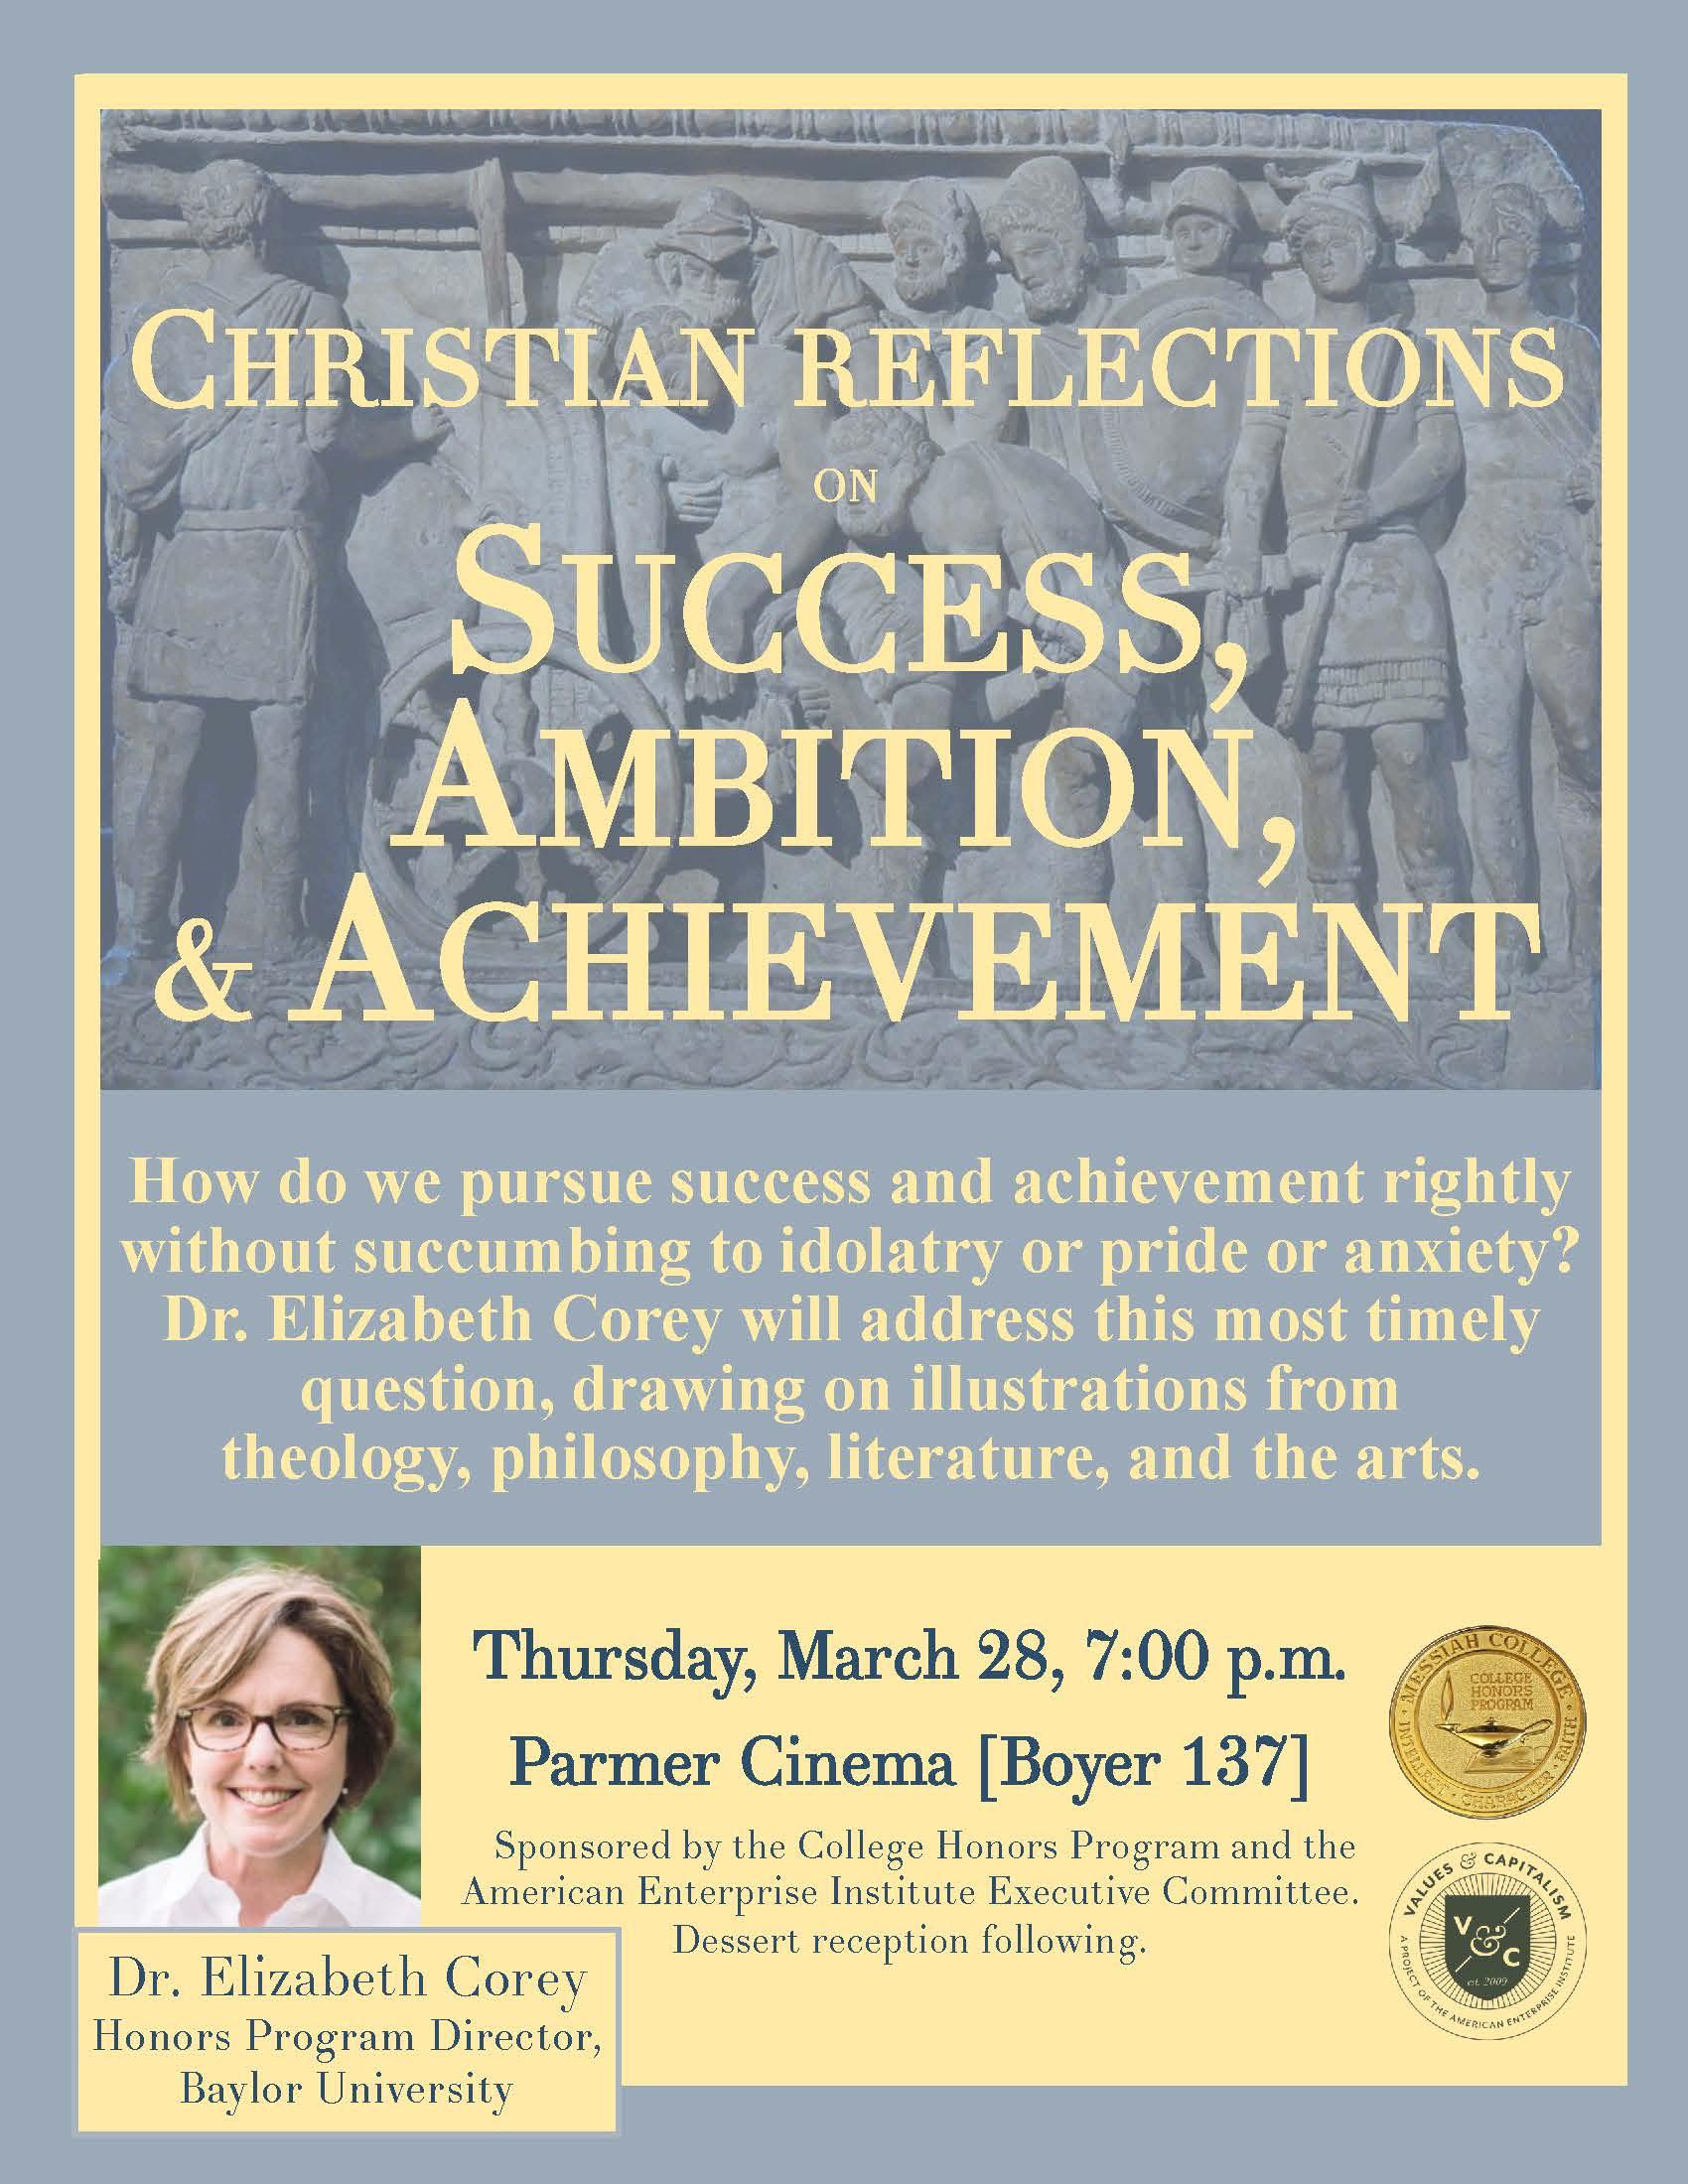 Lecture on "Christian Reflections on Success, Ambition, and Achievement"